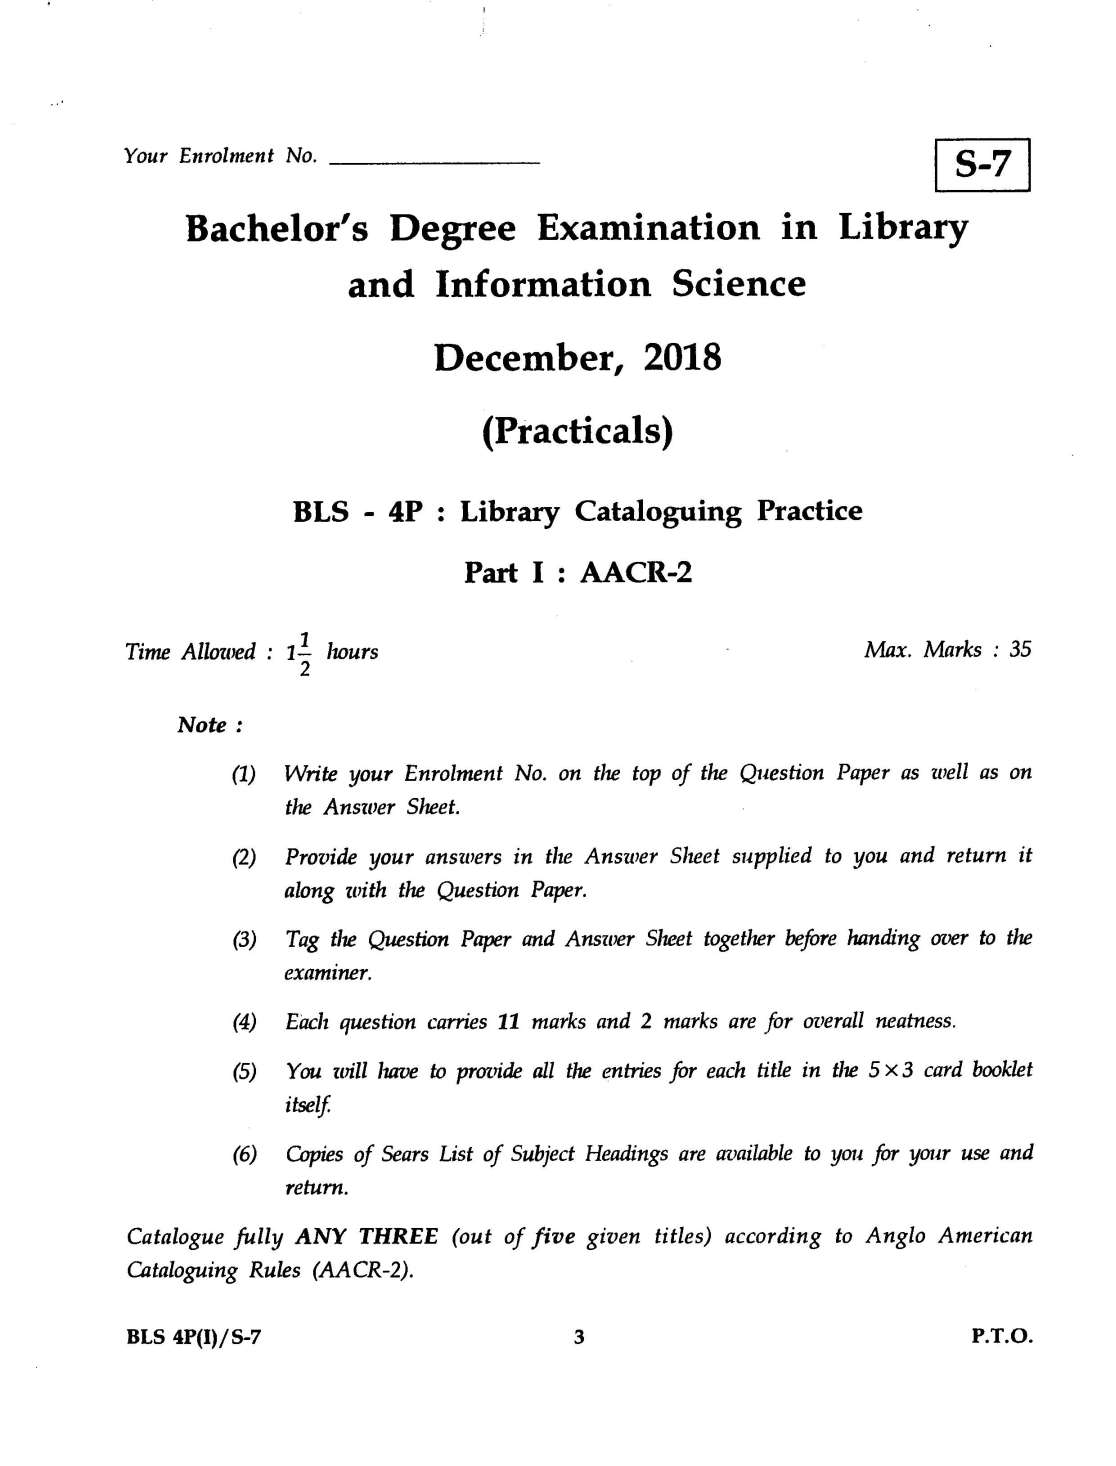 IGNOU BLS 4P(I)Set 7 Library Cataloguing Practice AACR2 Question